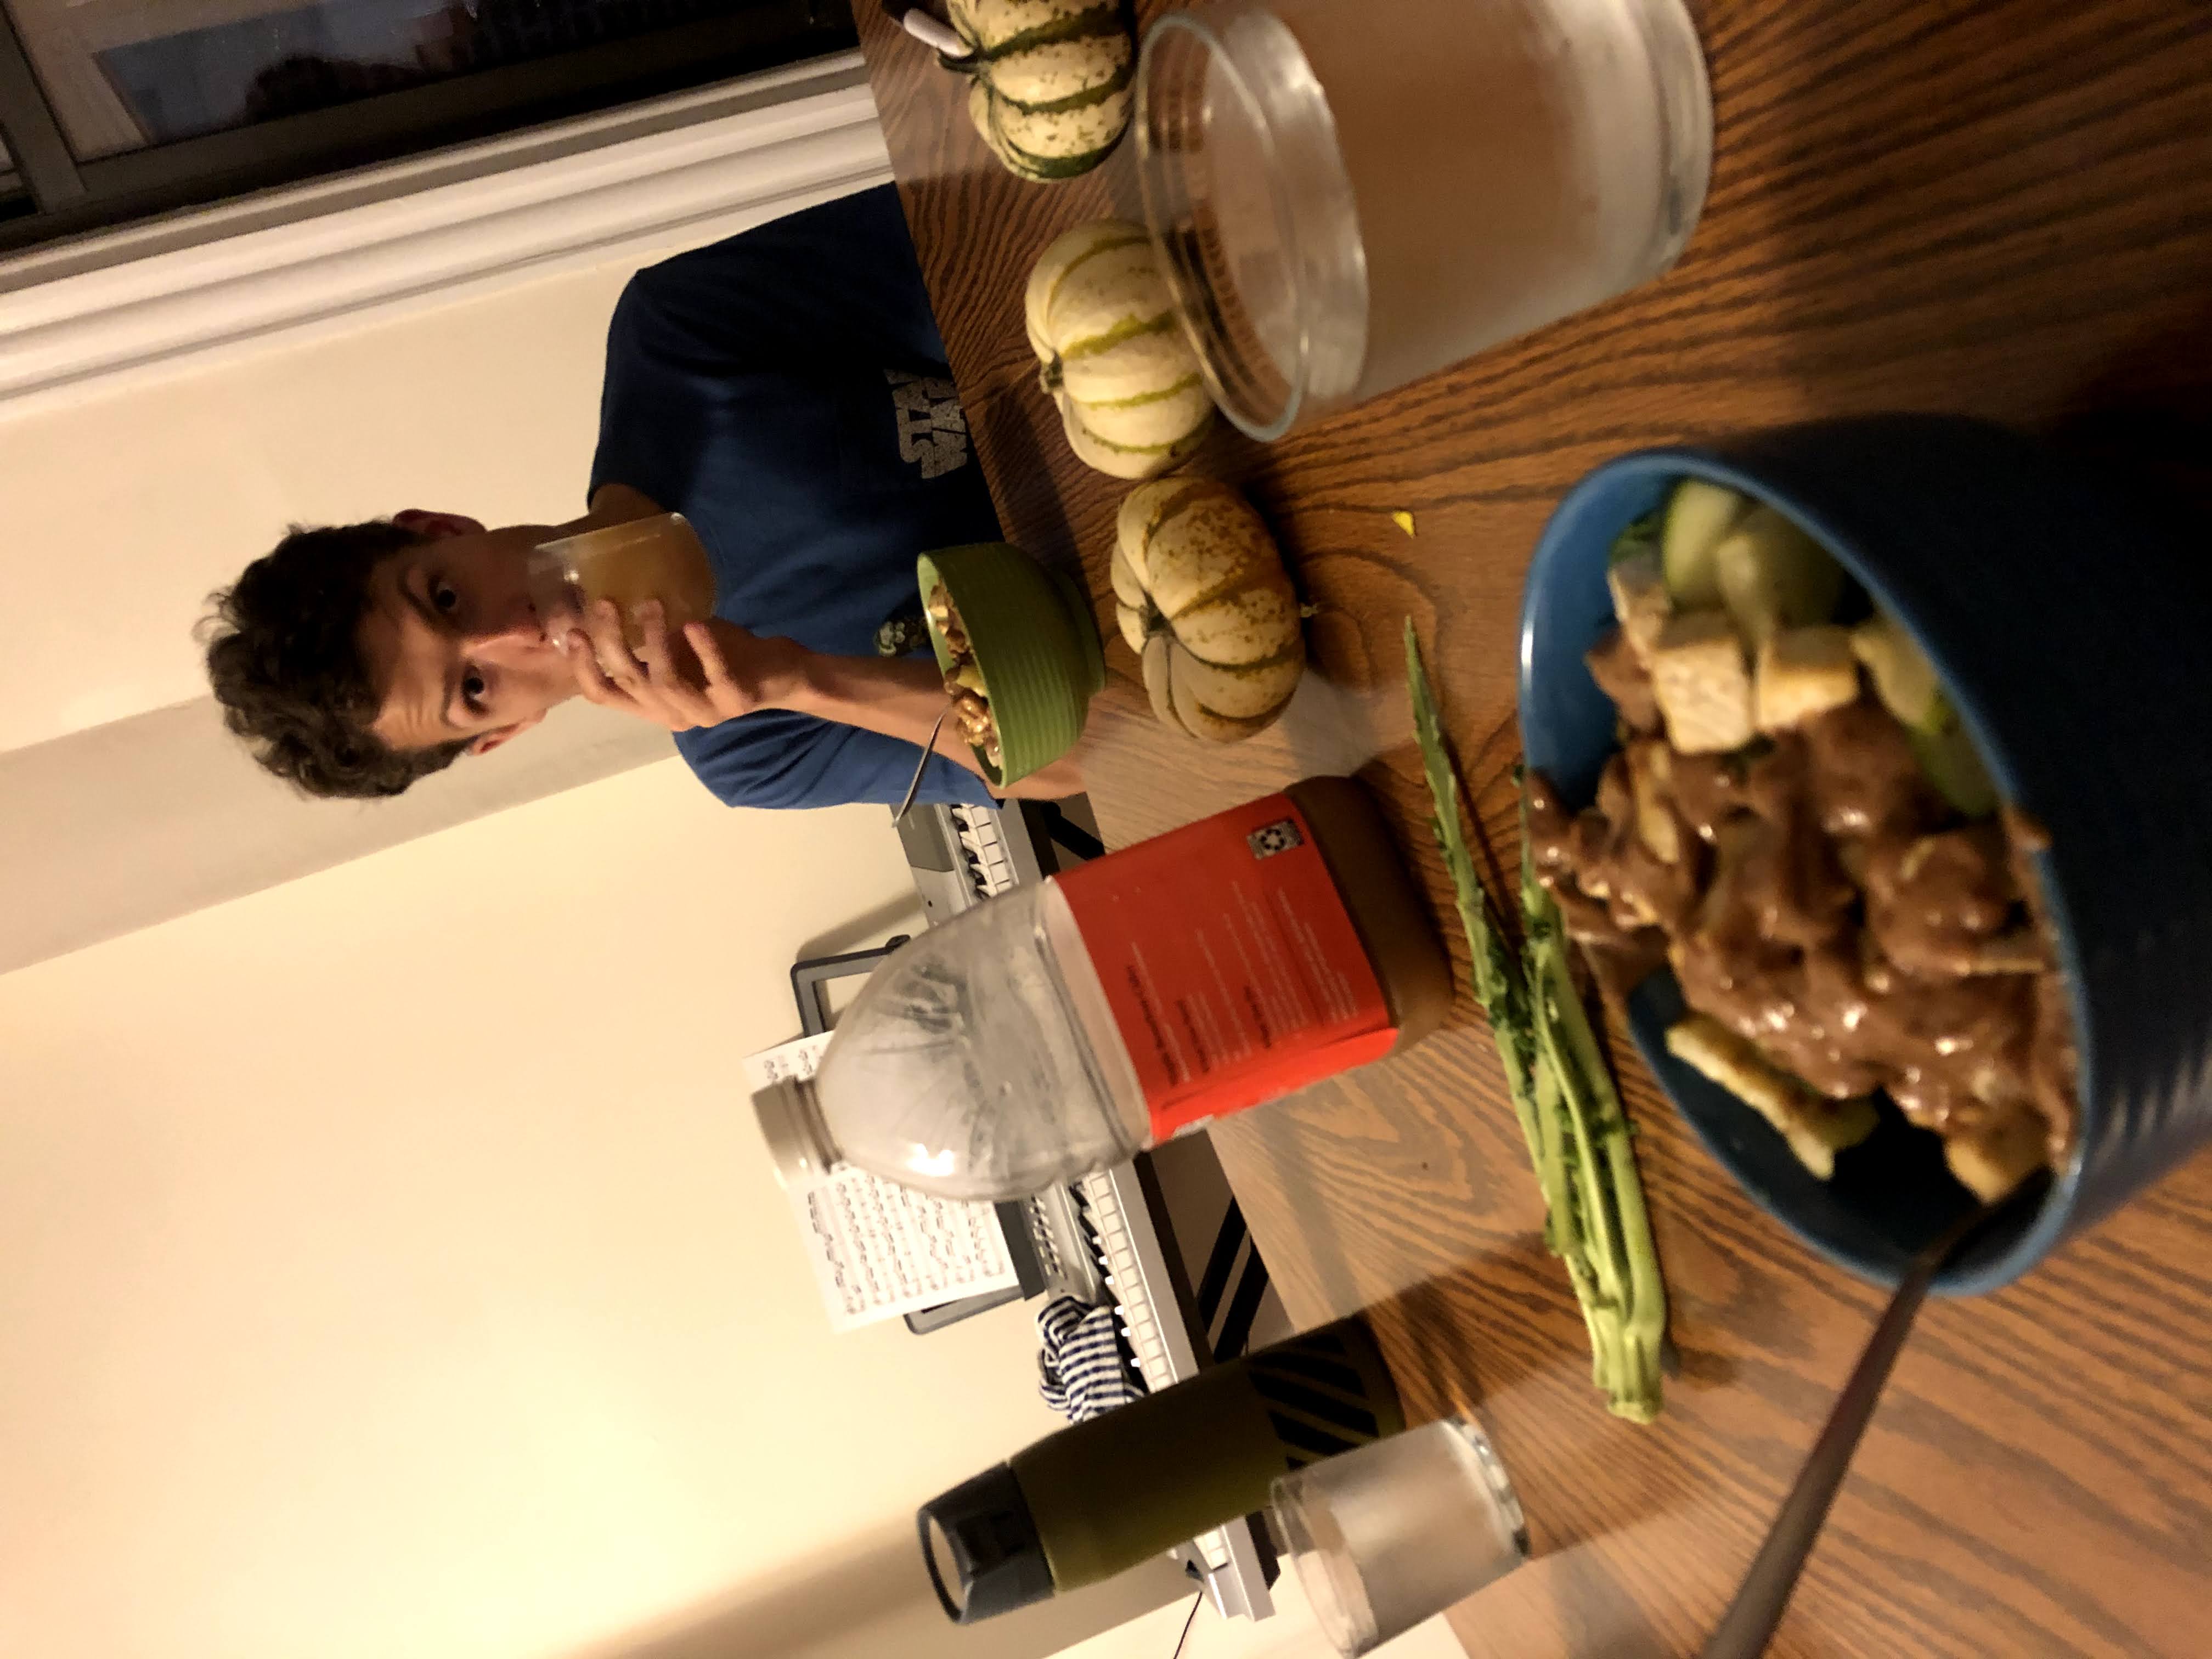 Nick with the fancy dinner he made